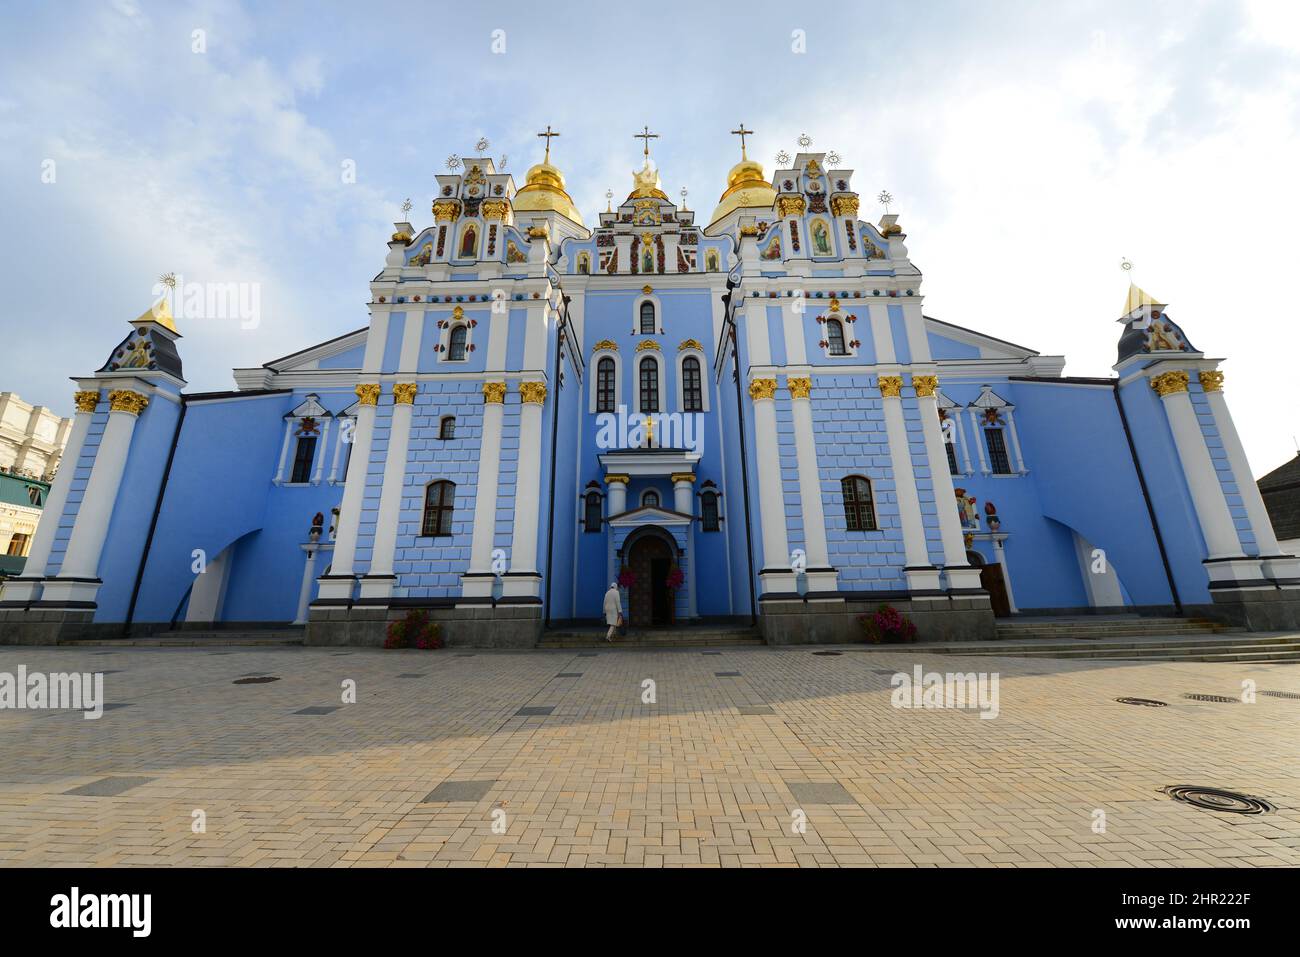 St Michael's Church at the St. Michael's Golden-Domed Monastery in Kyiv, Ukraine. Stock Photo